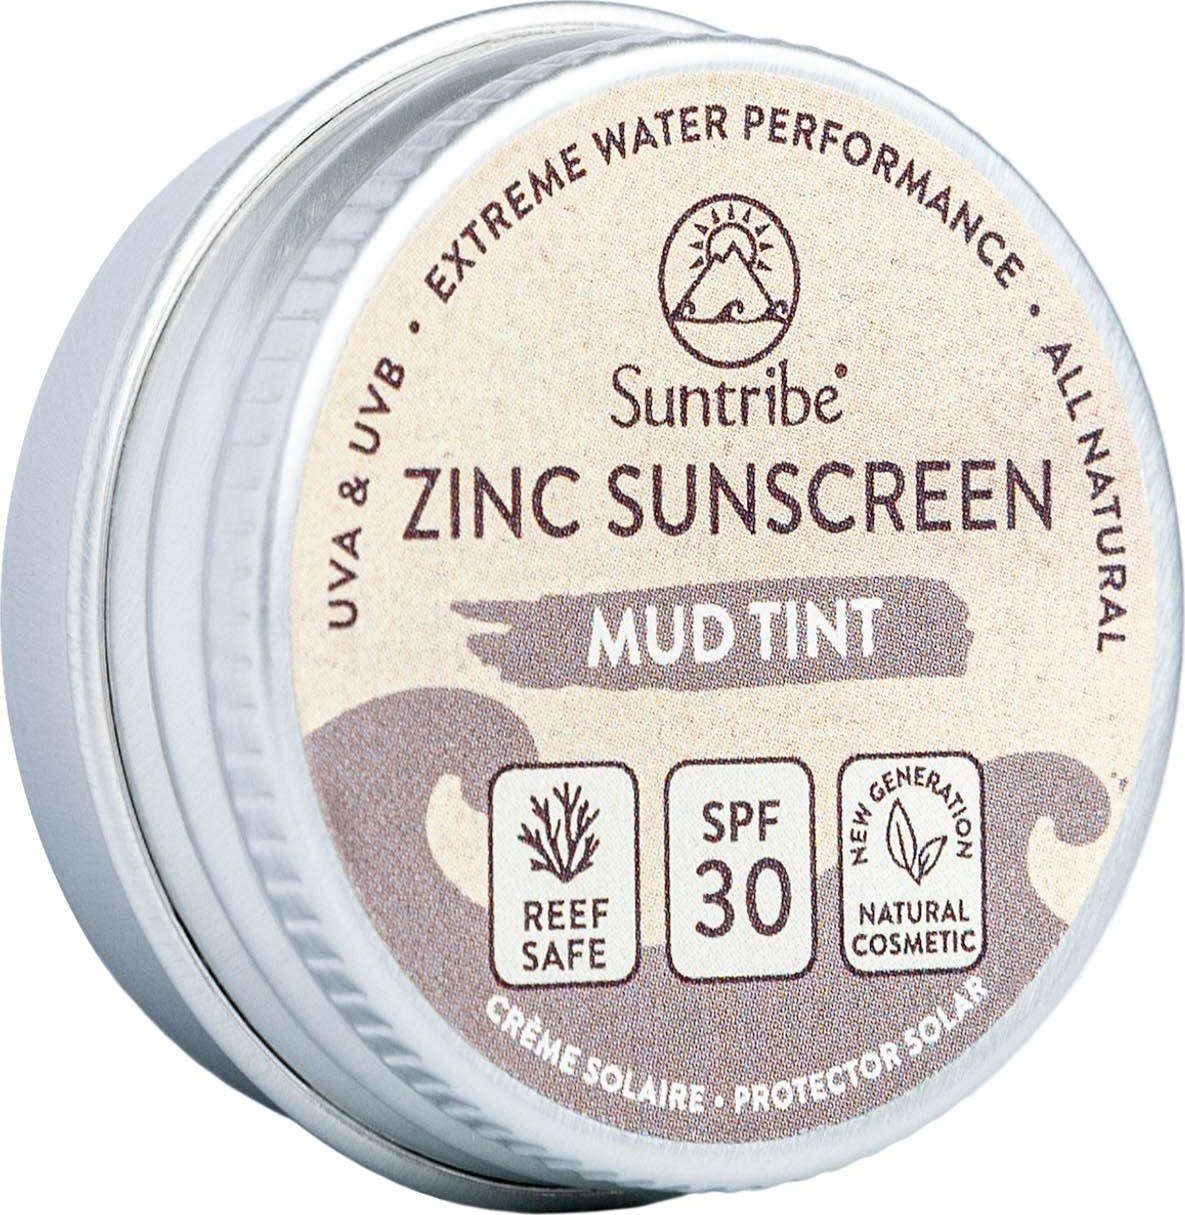 Suntribe Mini Natural Mineral Face and Sport Zinc Sunscreen SPF 30 Tinted